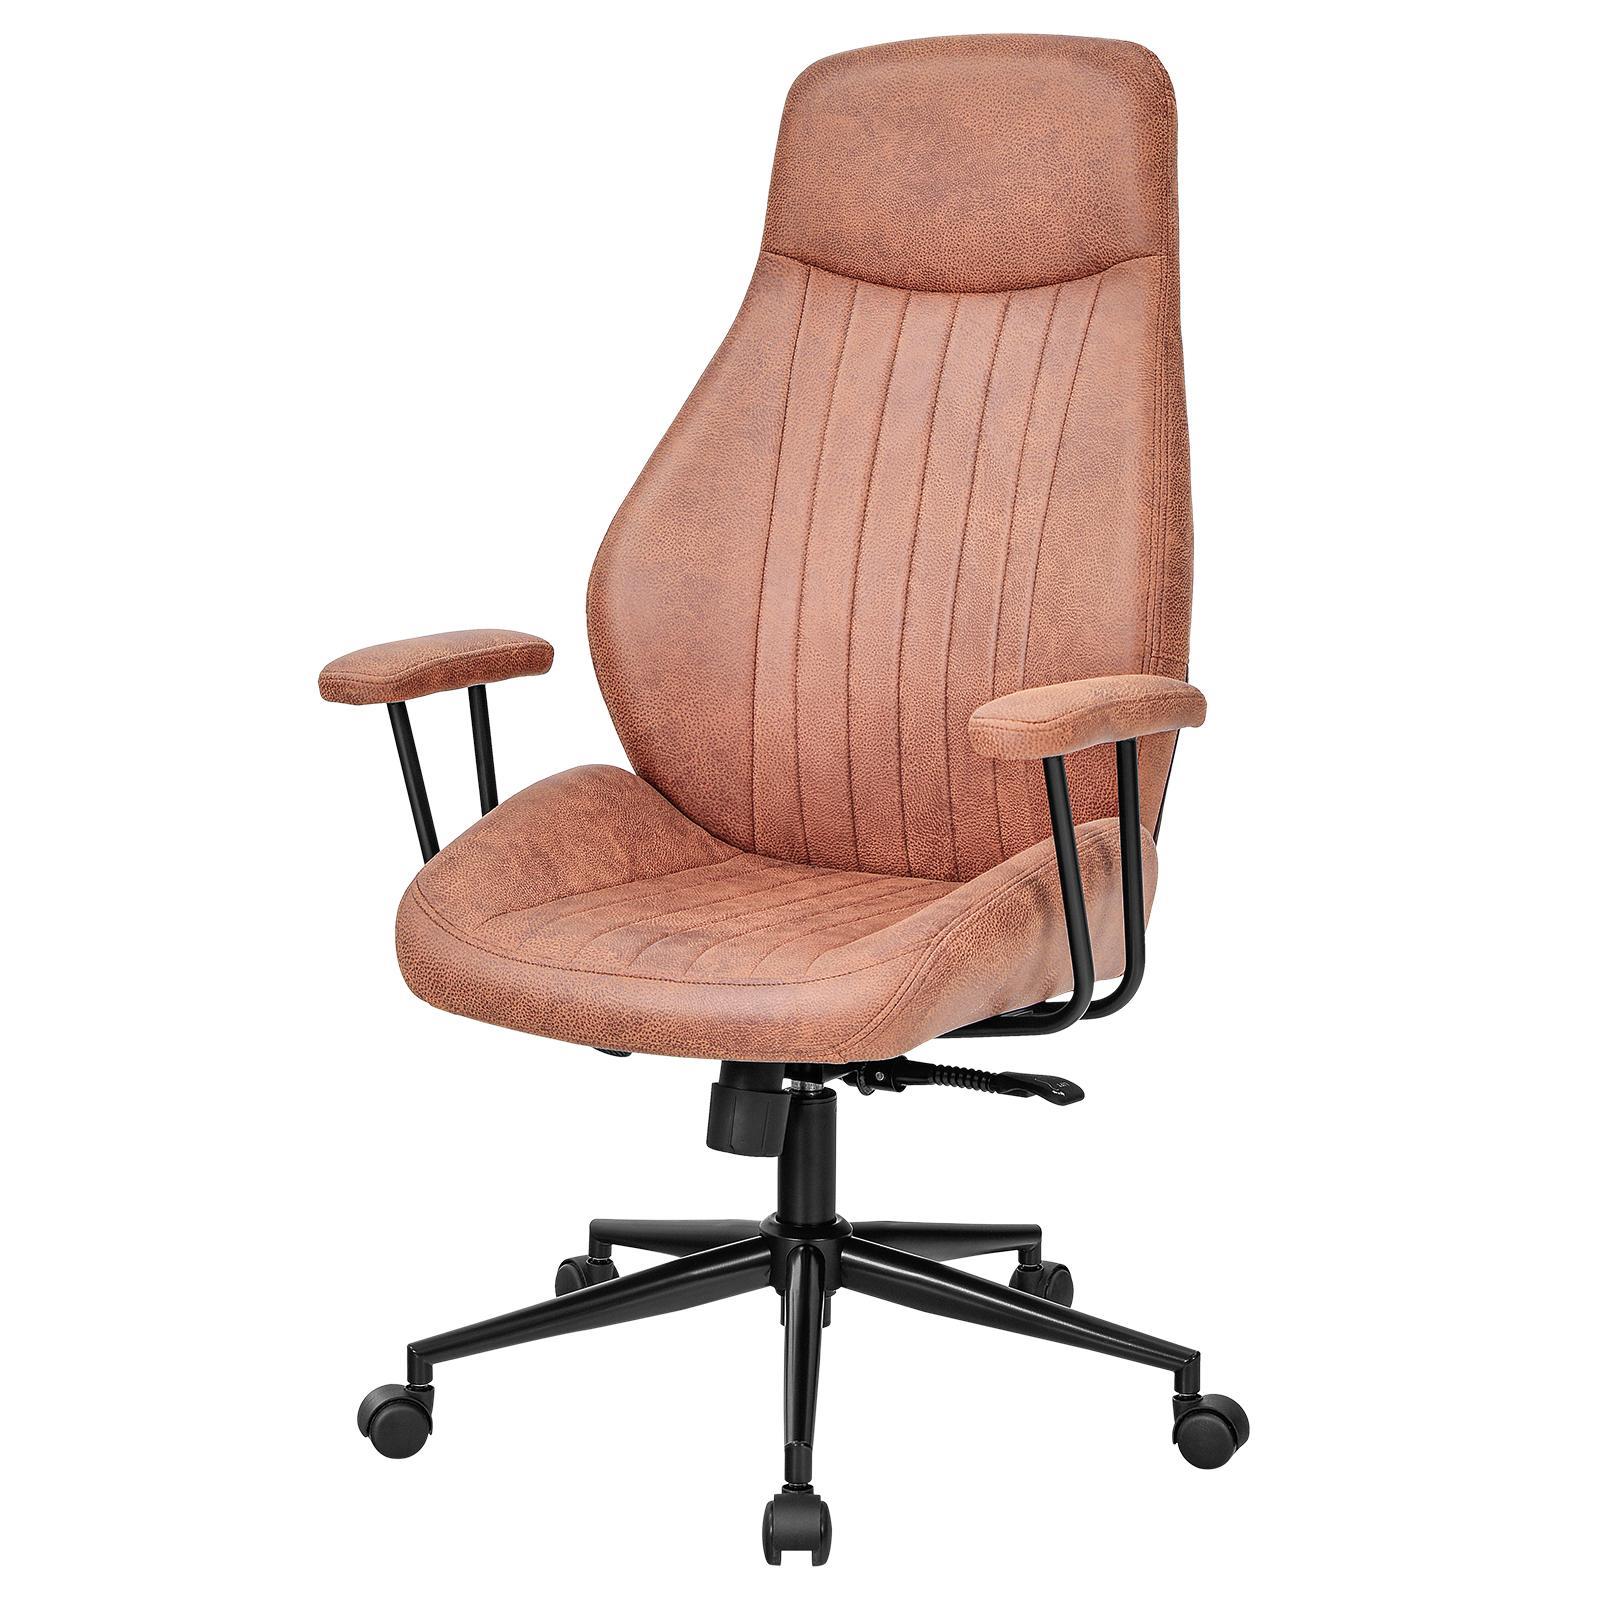 Giantex Suede Fabric Ergonomic Office Chair Adjustable High Back Computer Desk Chair Executive Swivel Chair ,Reddish Brown